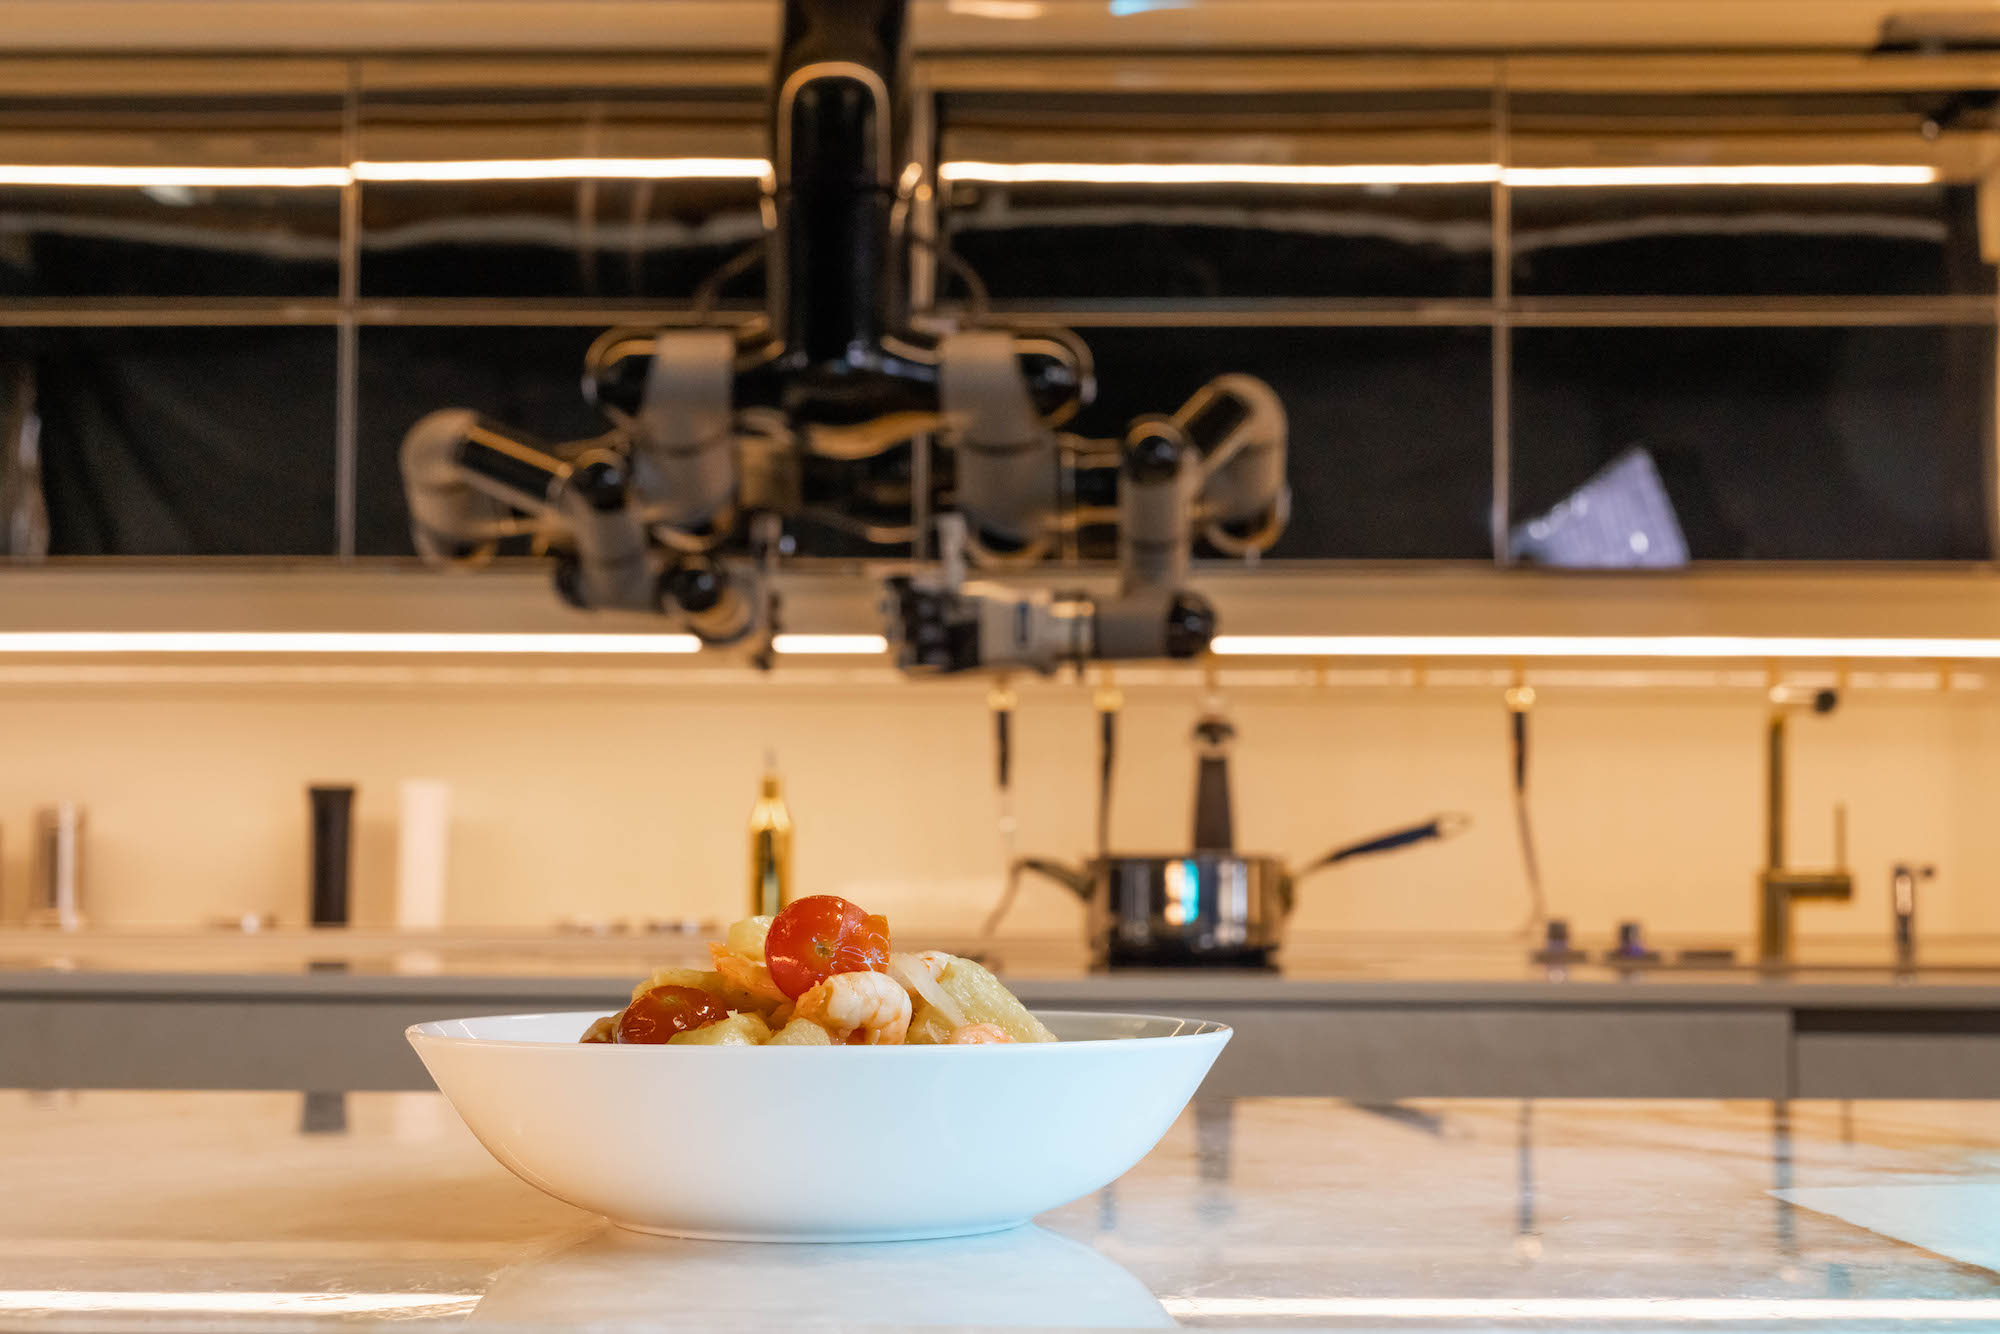 Moley robotic kitchen knows thousands of recipes